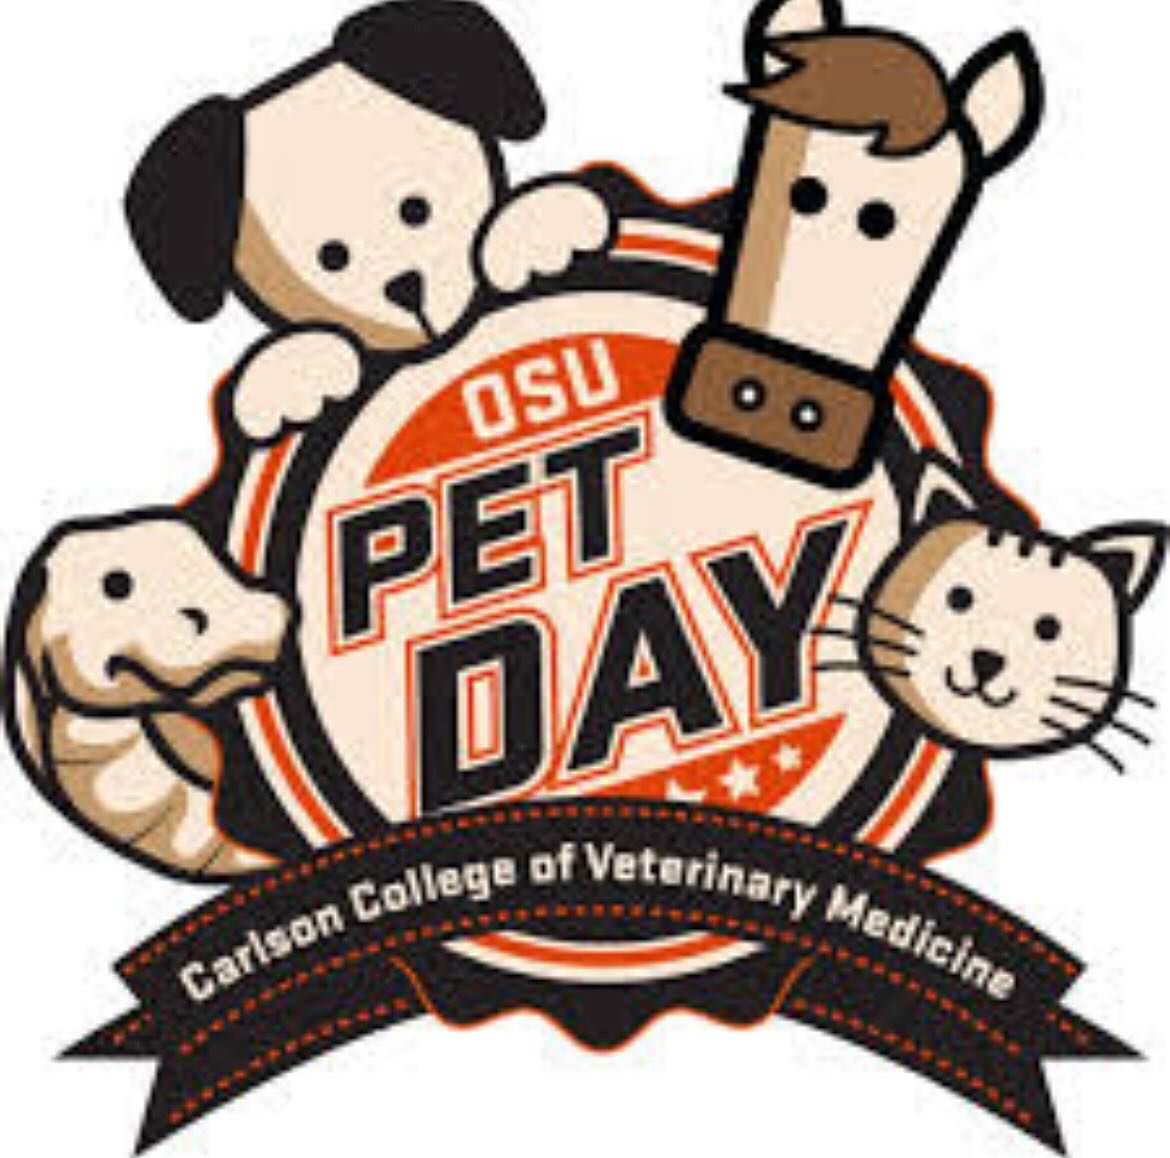 📣Calling all animal lovers &amp; advocates! 📣

Are you ready for a day filled with furry fun and heartwarming stories? 💙Join us at OSU Pet Day on Saturday, May 4th from 10 am to 3 pm. 🐕🐾
 
Stop by our booth to learn all about our mission to supp